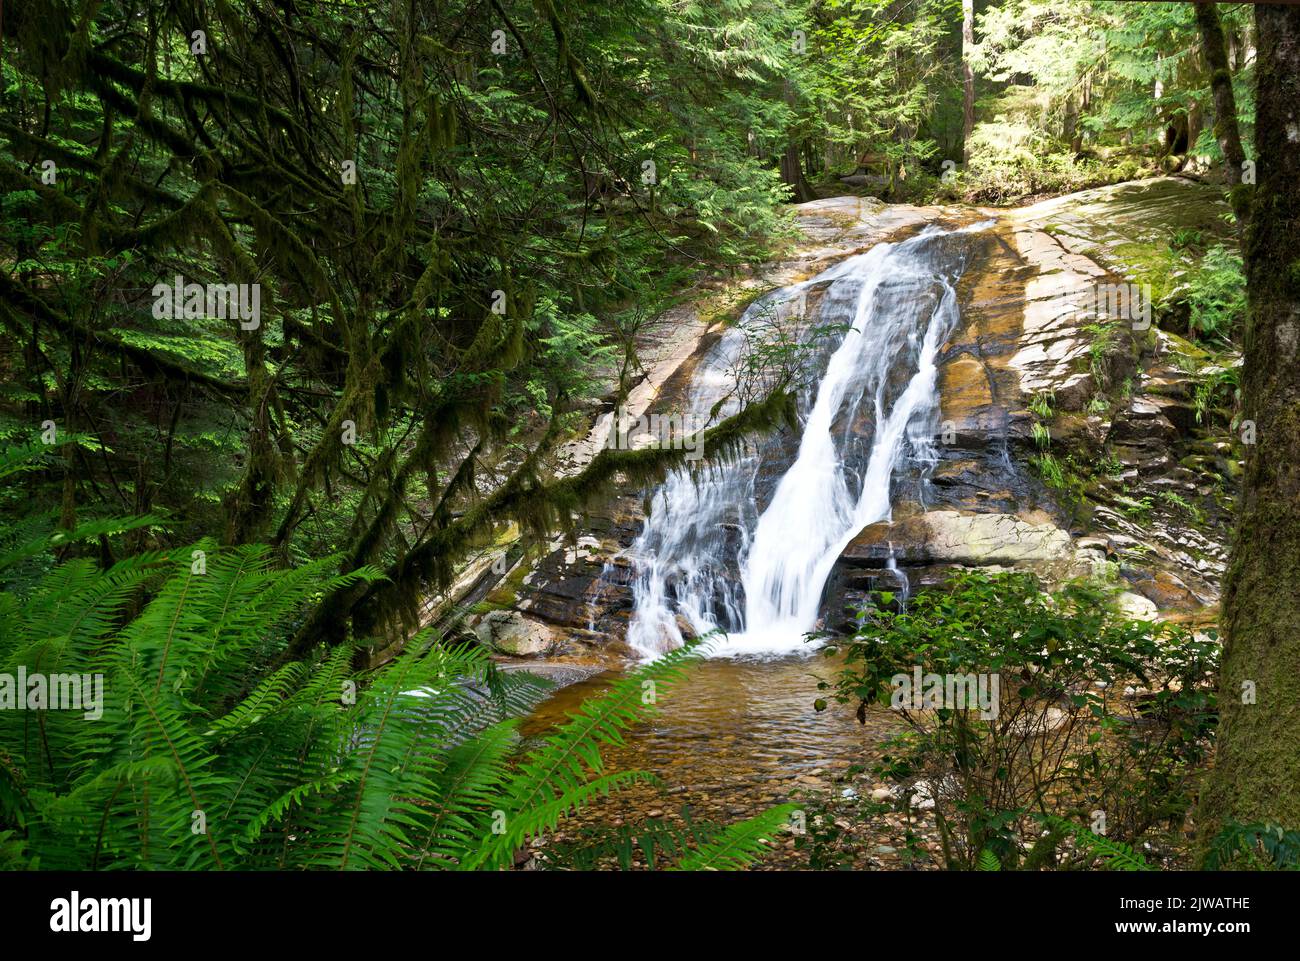 Waterfall in Cliff Gilker park in Roberts Creek on the Sunshine Coast of British Columbia, Canada. Stock Photo